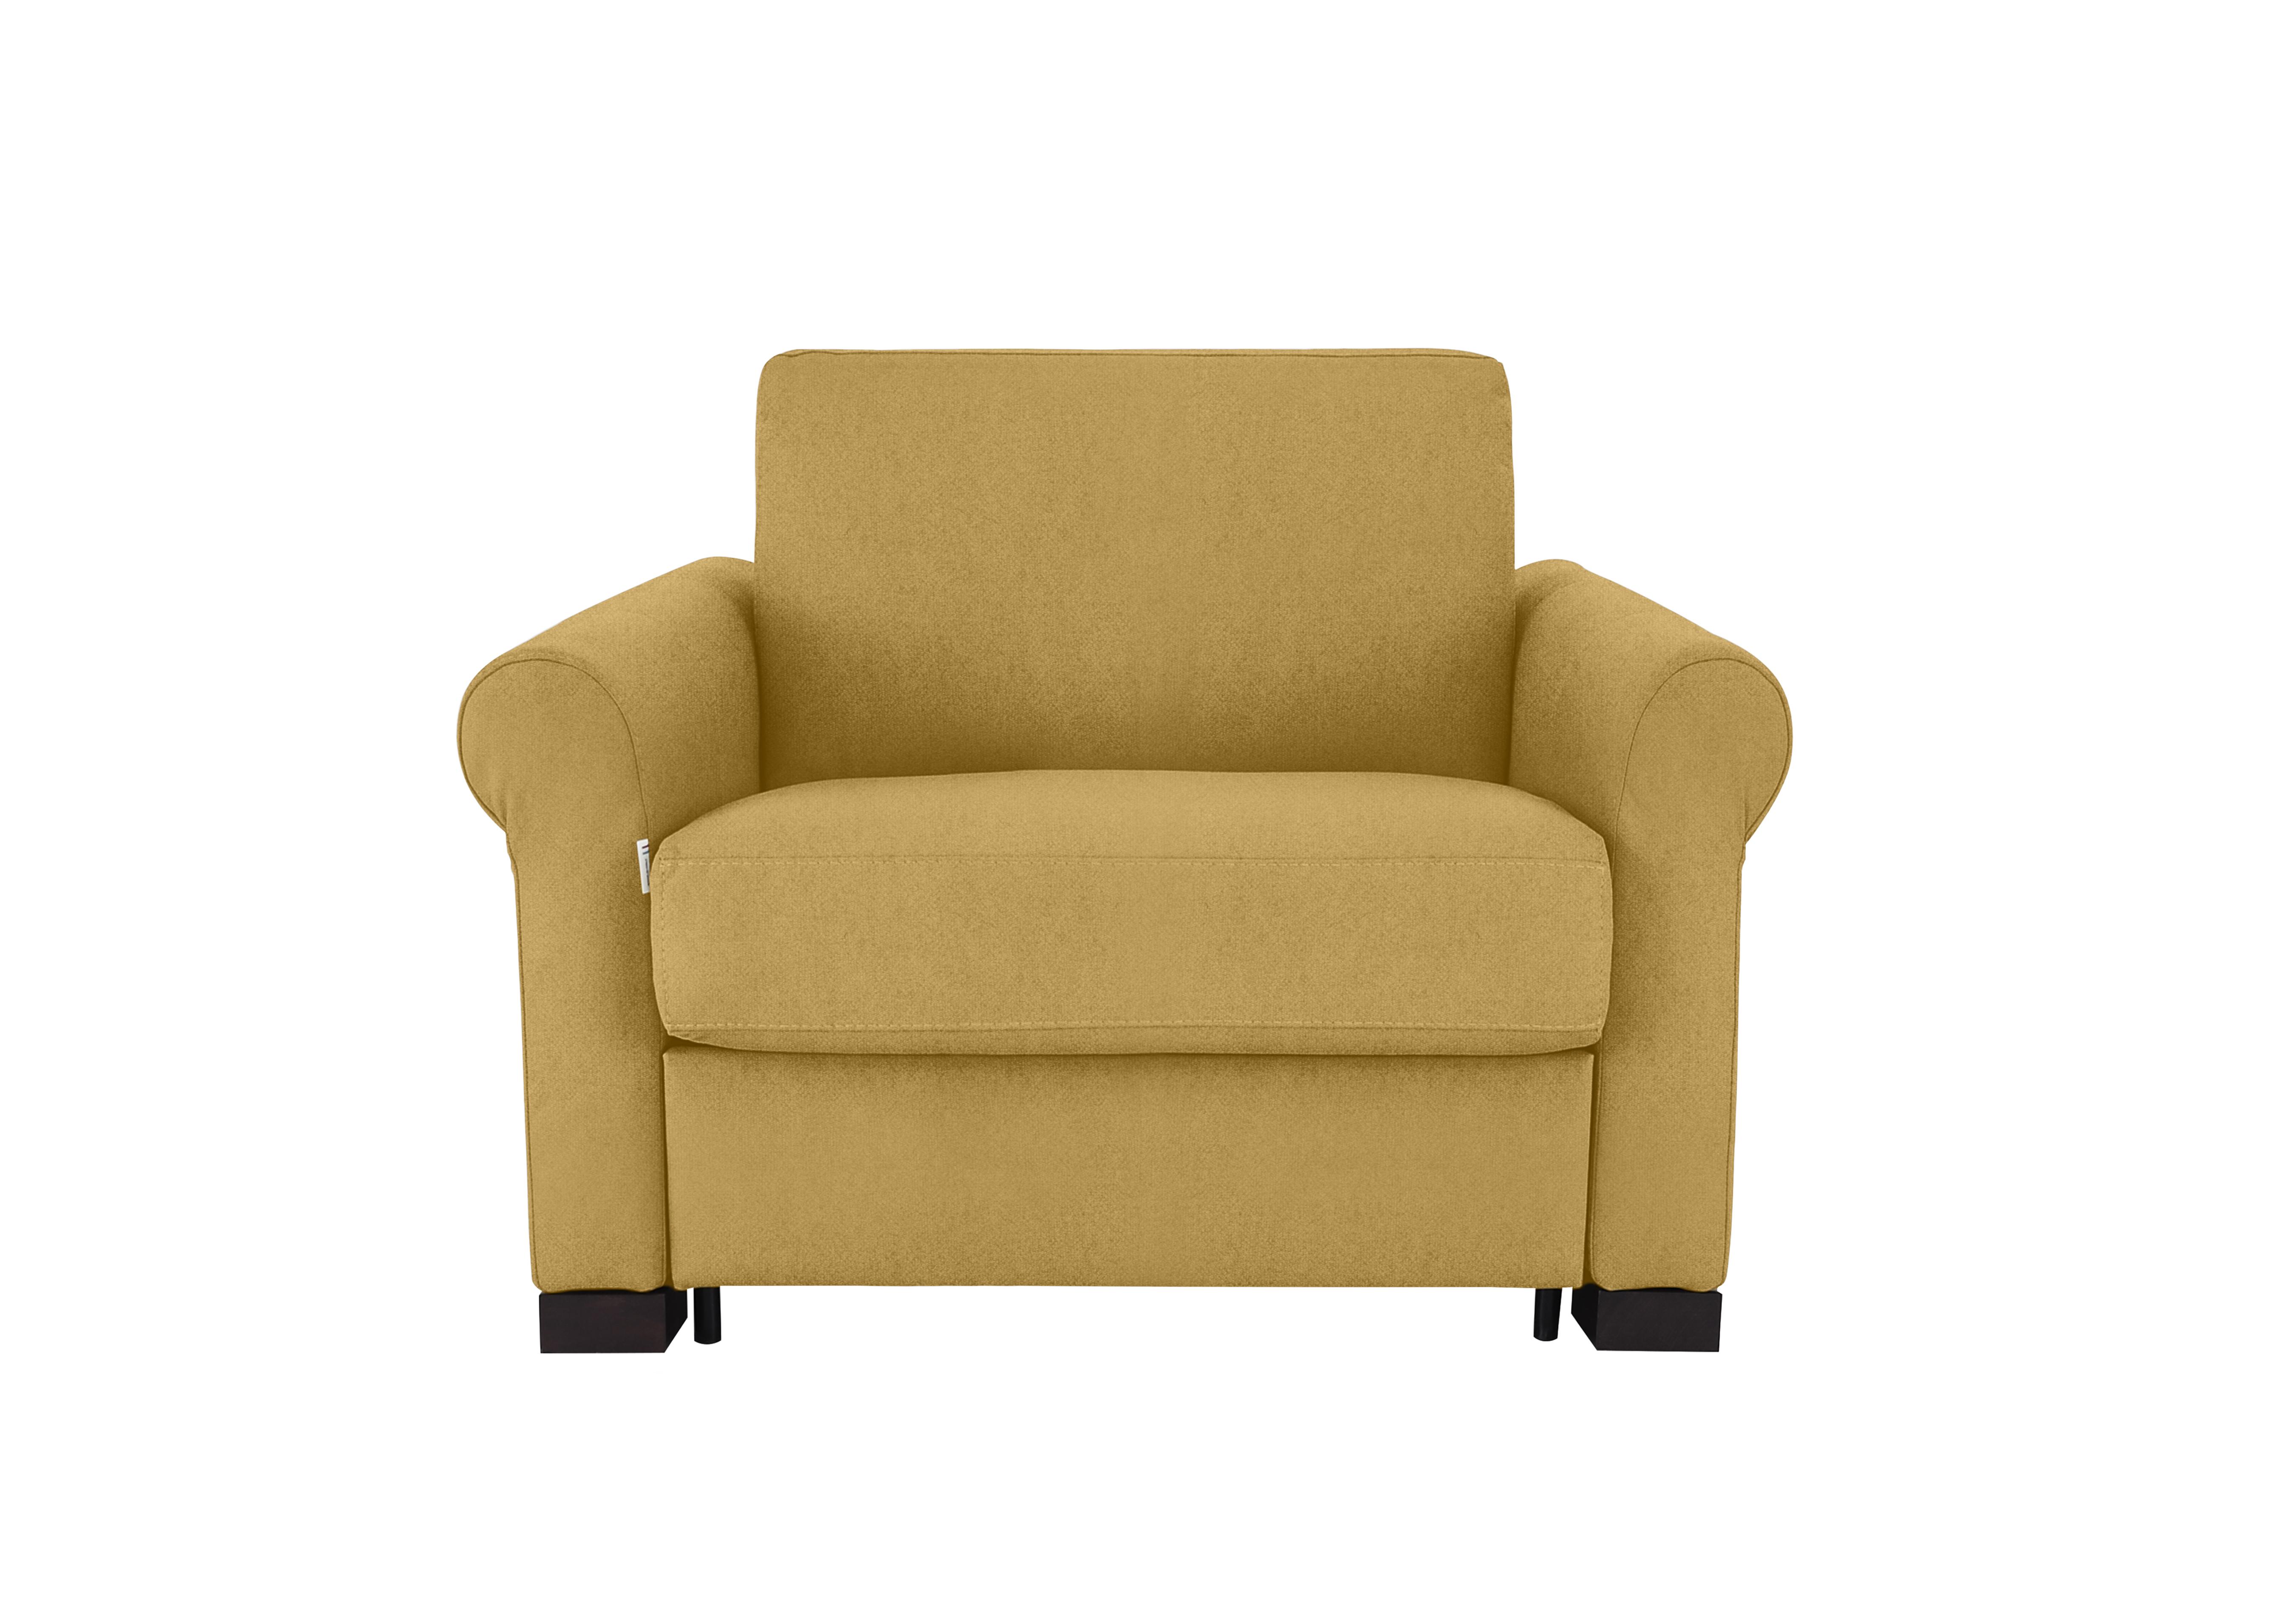 Alcova Fabric Chair Sofa Bed with Scroll Arms in Fuente Mostaza on Furniture Village